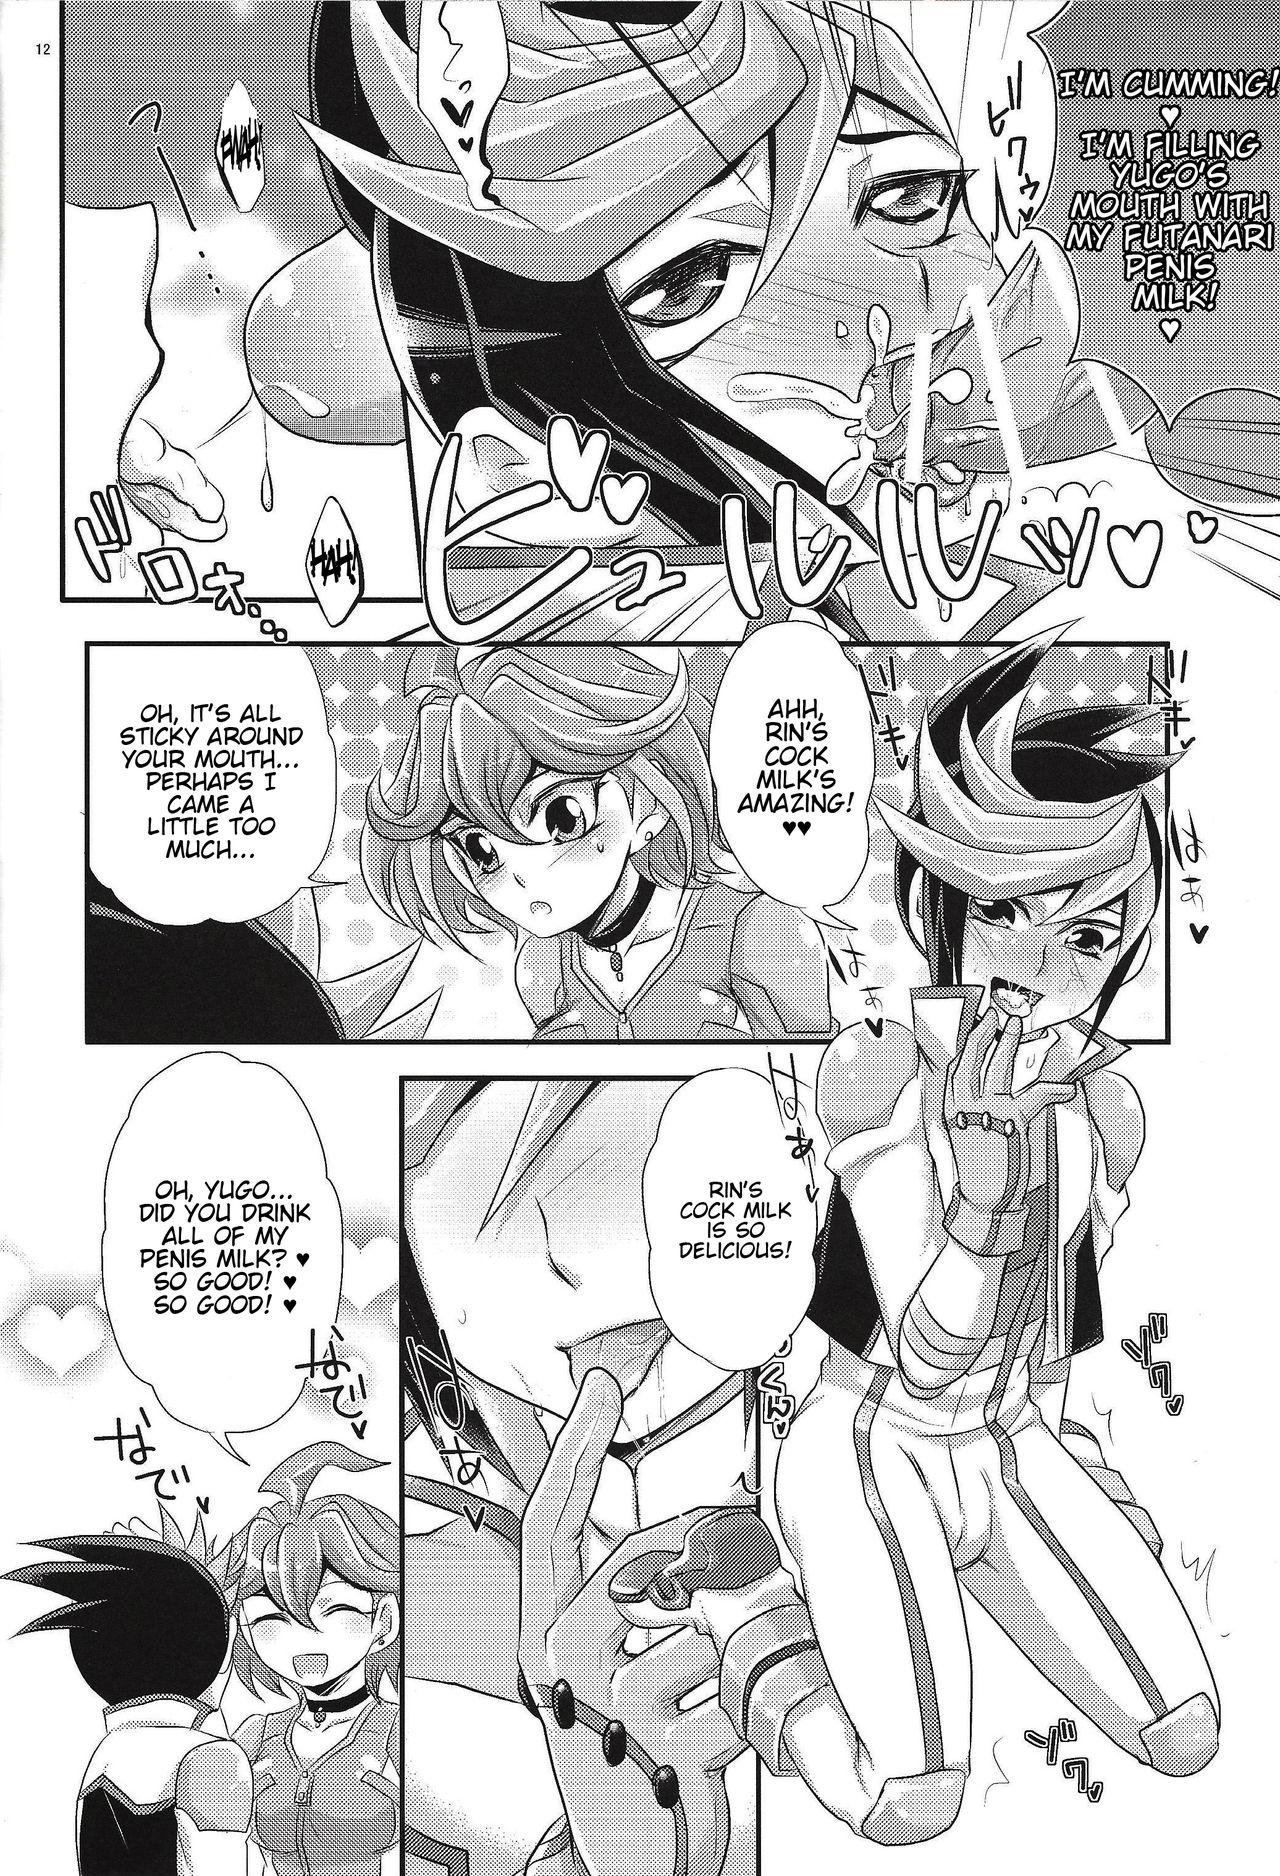 Bubble Butt ACME of Smile! - Yu-gi-oh arc-v Glamour - Page 11